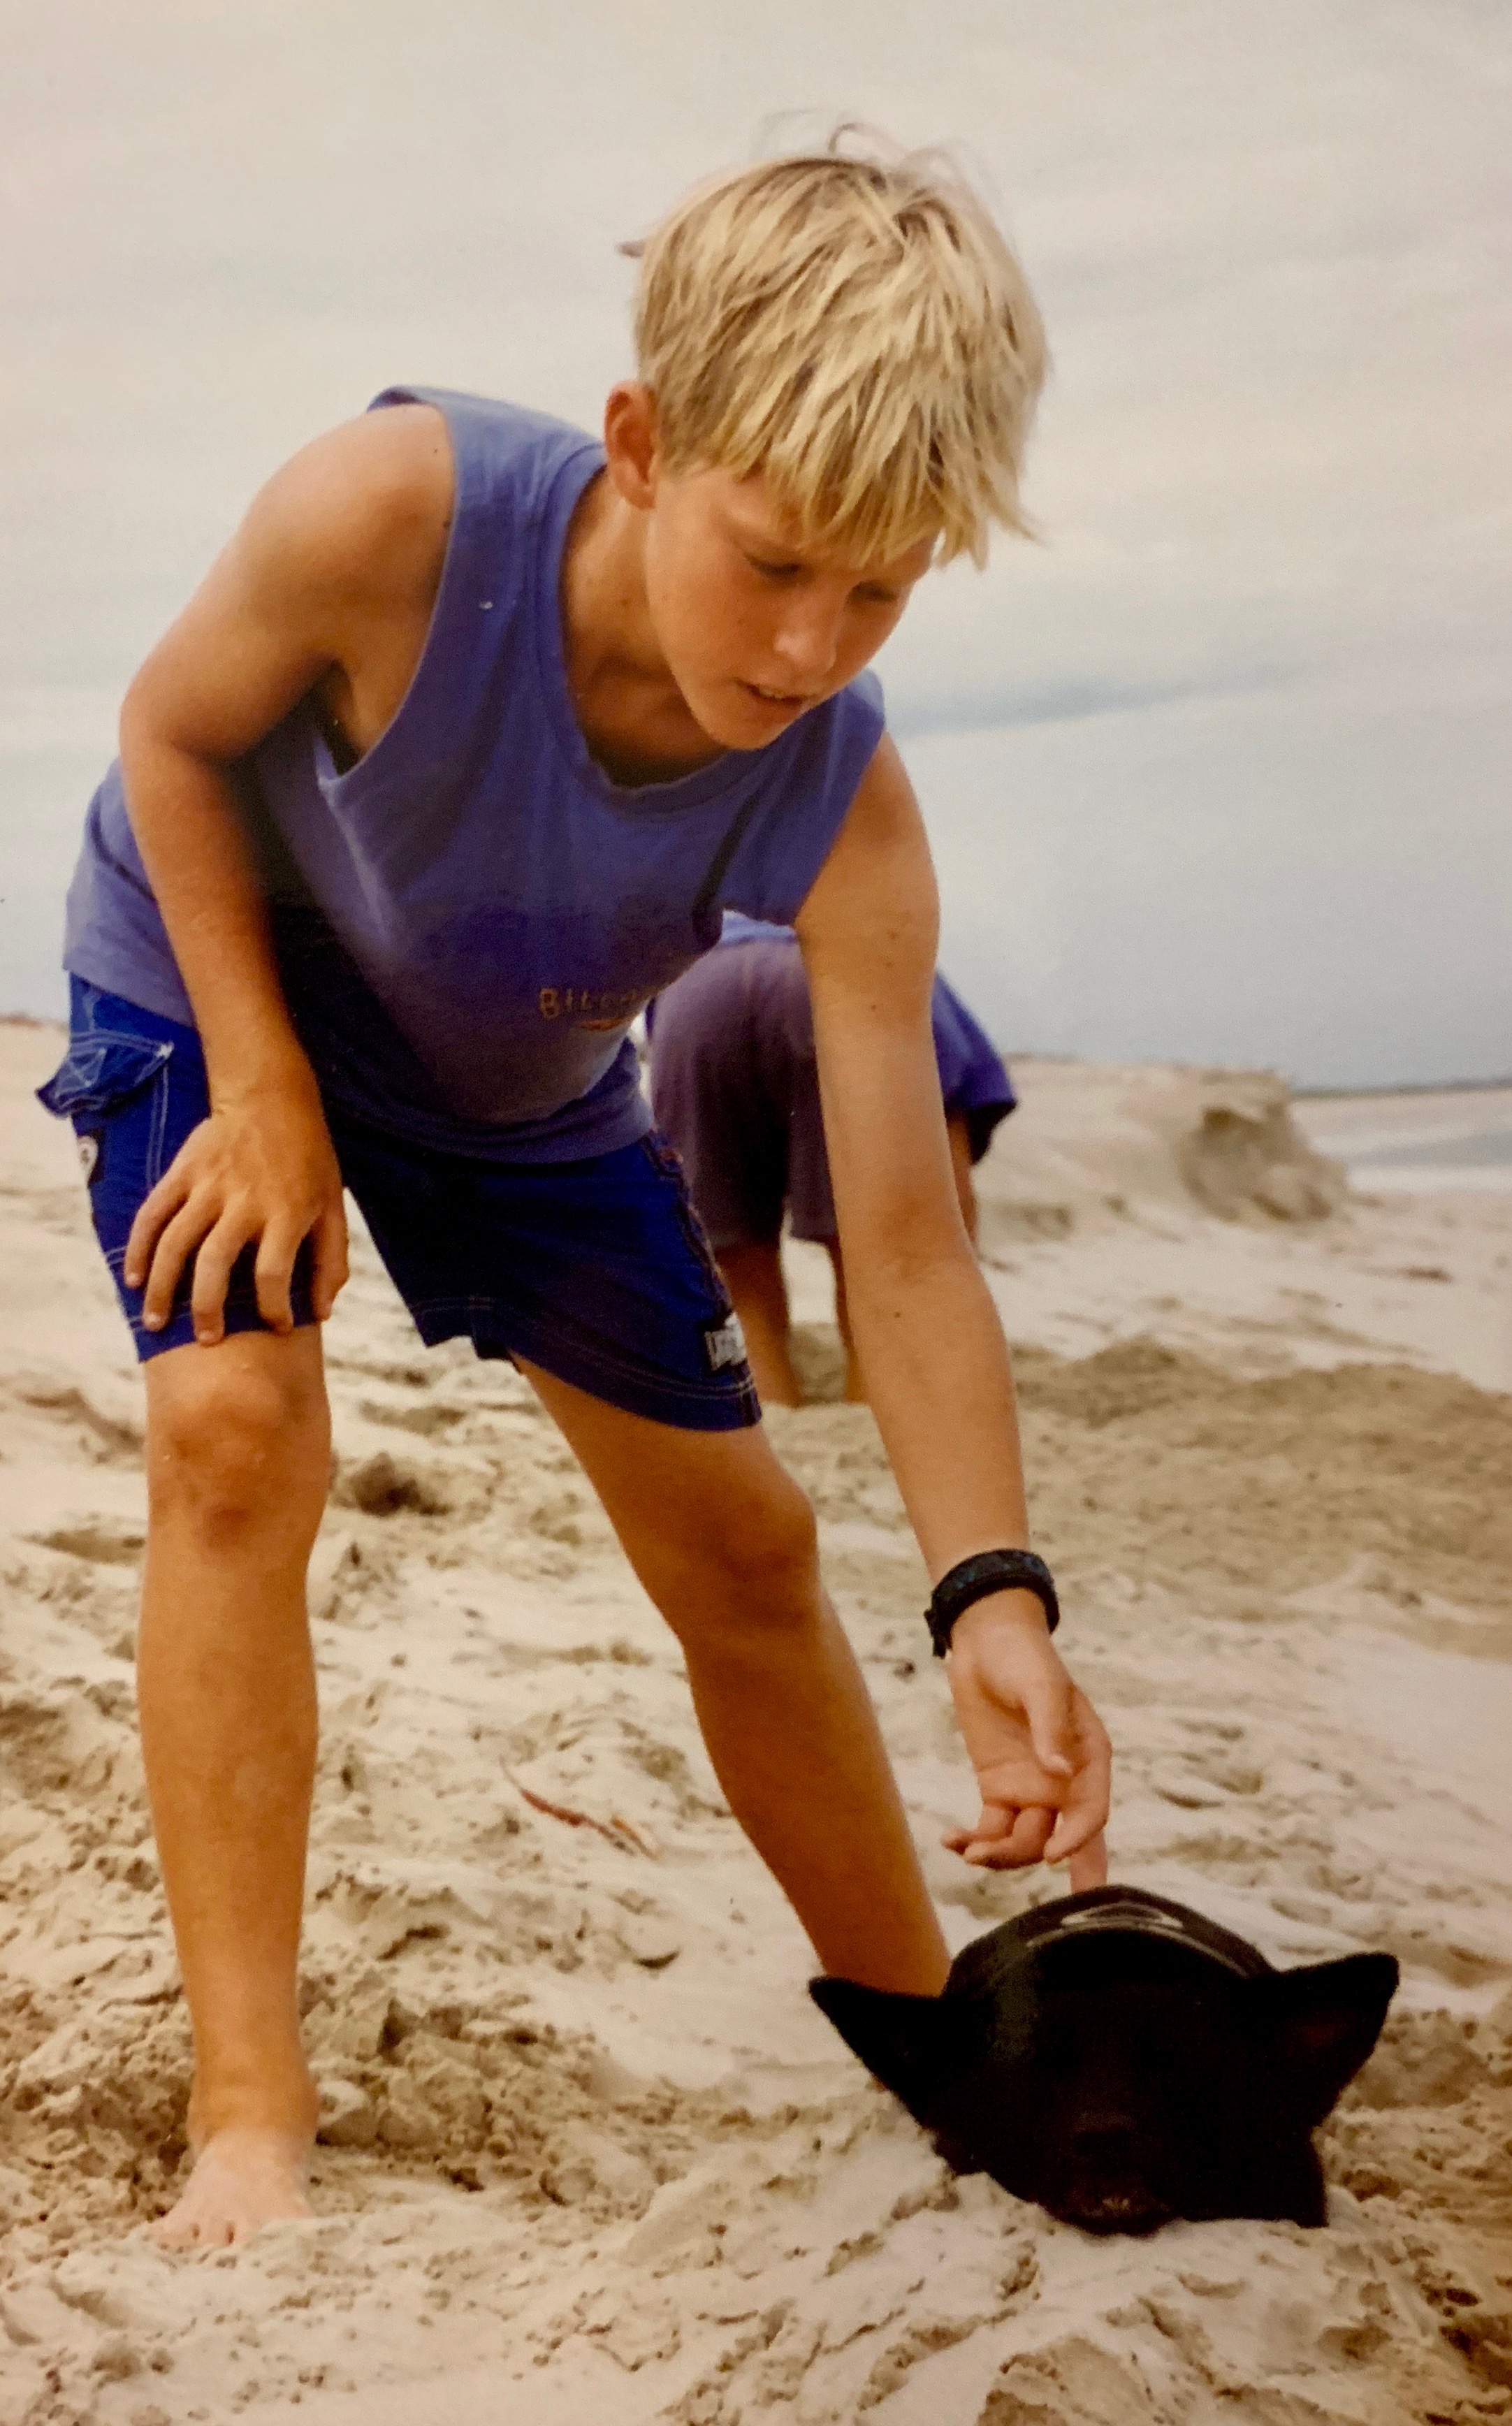 Me (aged 12) on a beach north of Broome with my best mate, a kelpie named Sooty